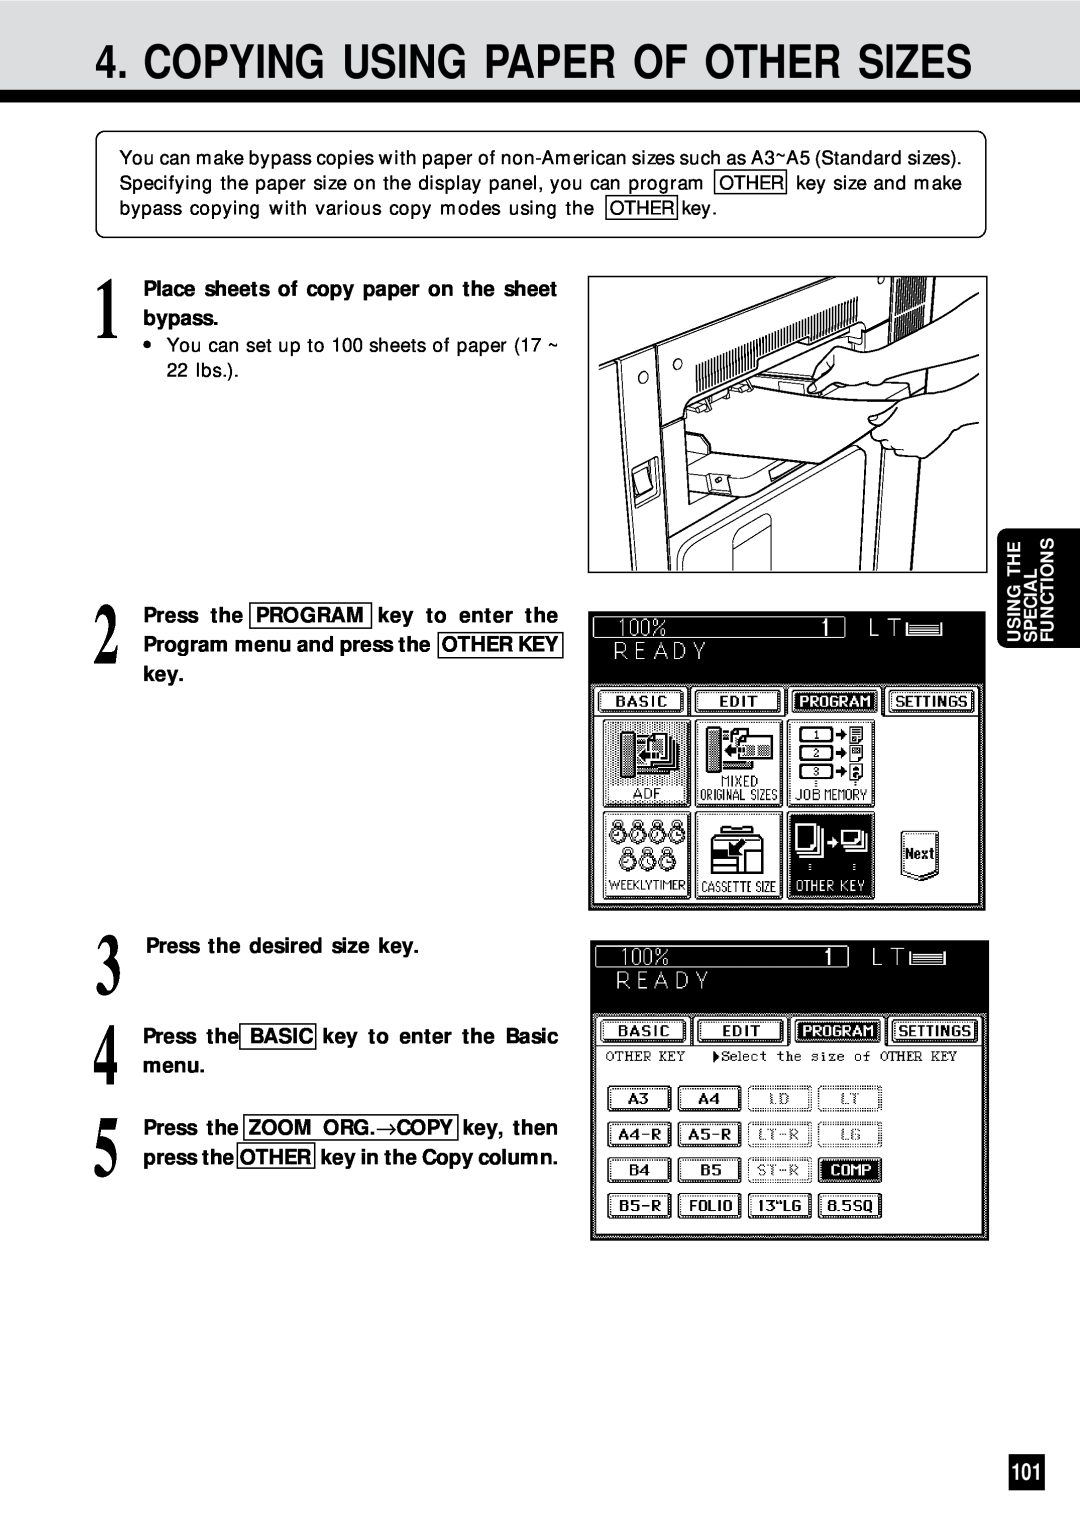 Sharp AR-650 operation manual Copying Using Paper Of Other Sizes, Place sheets of copy paper on the sheet bypass 